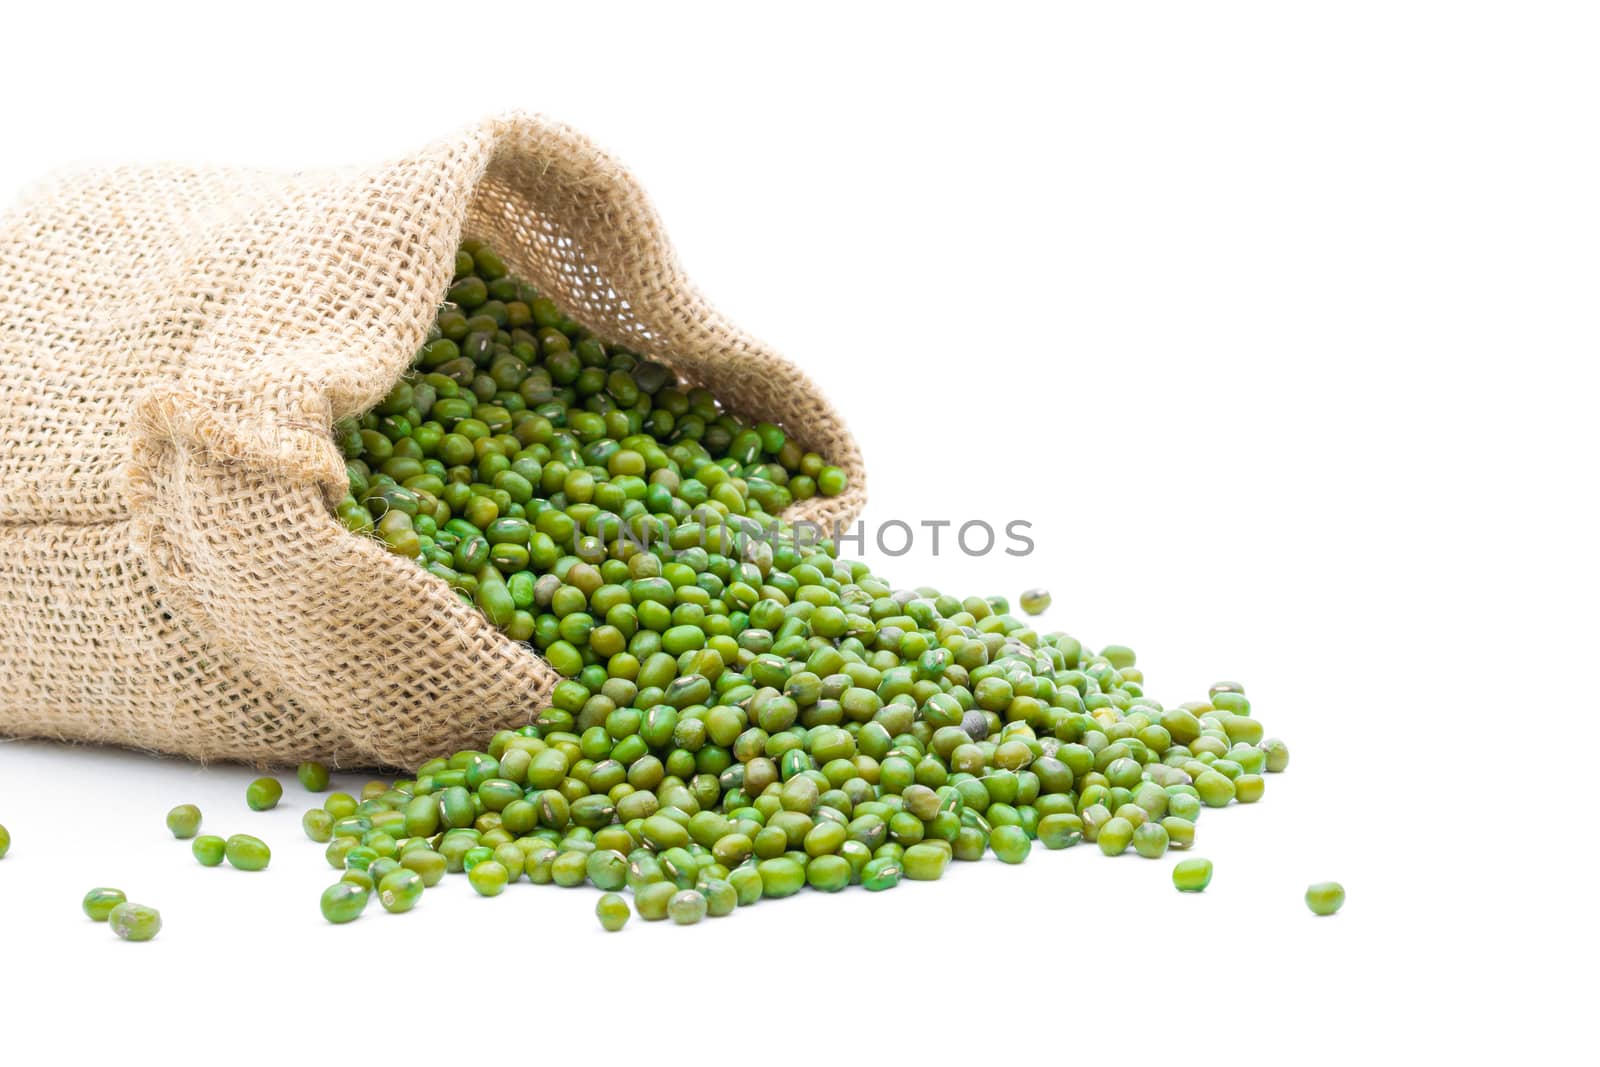 Grains Mung bean in a sack on a white background by sompongtom